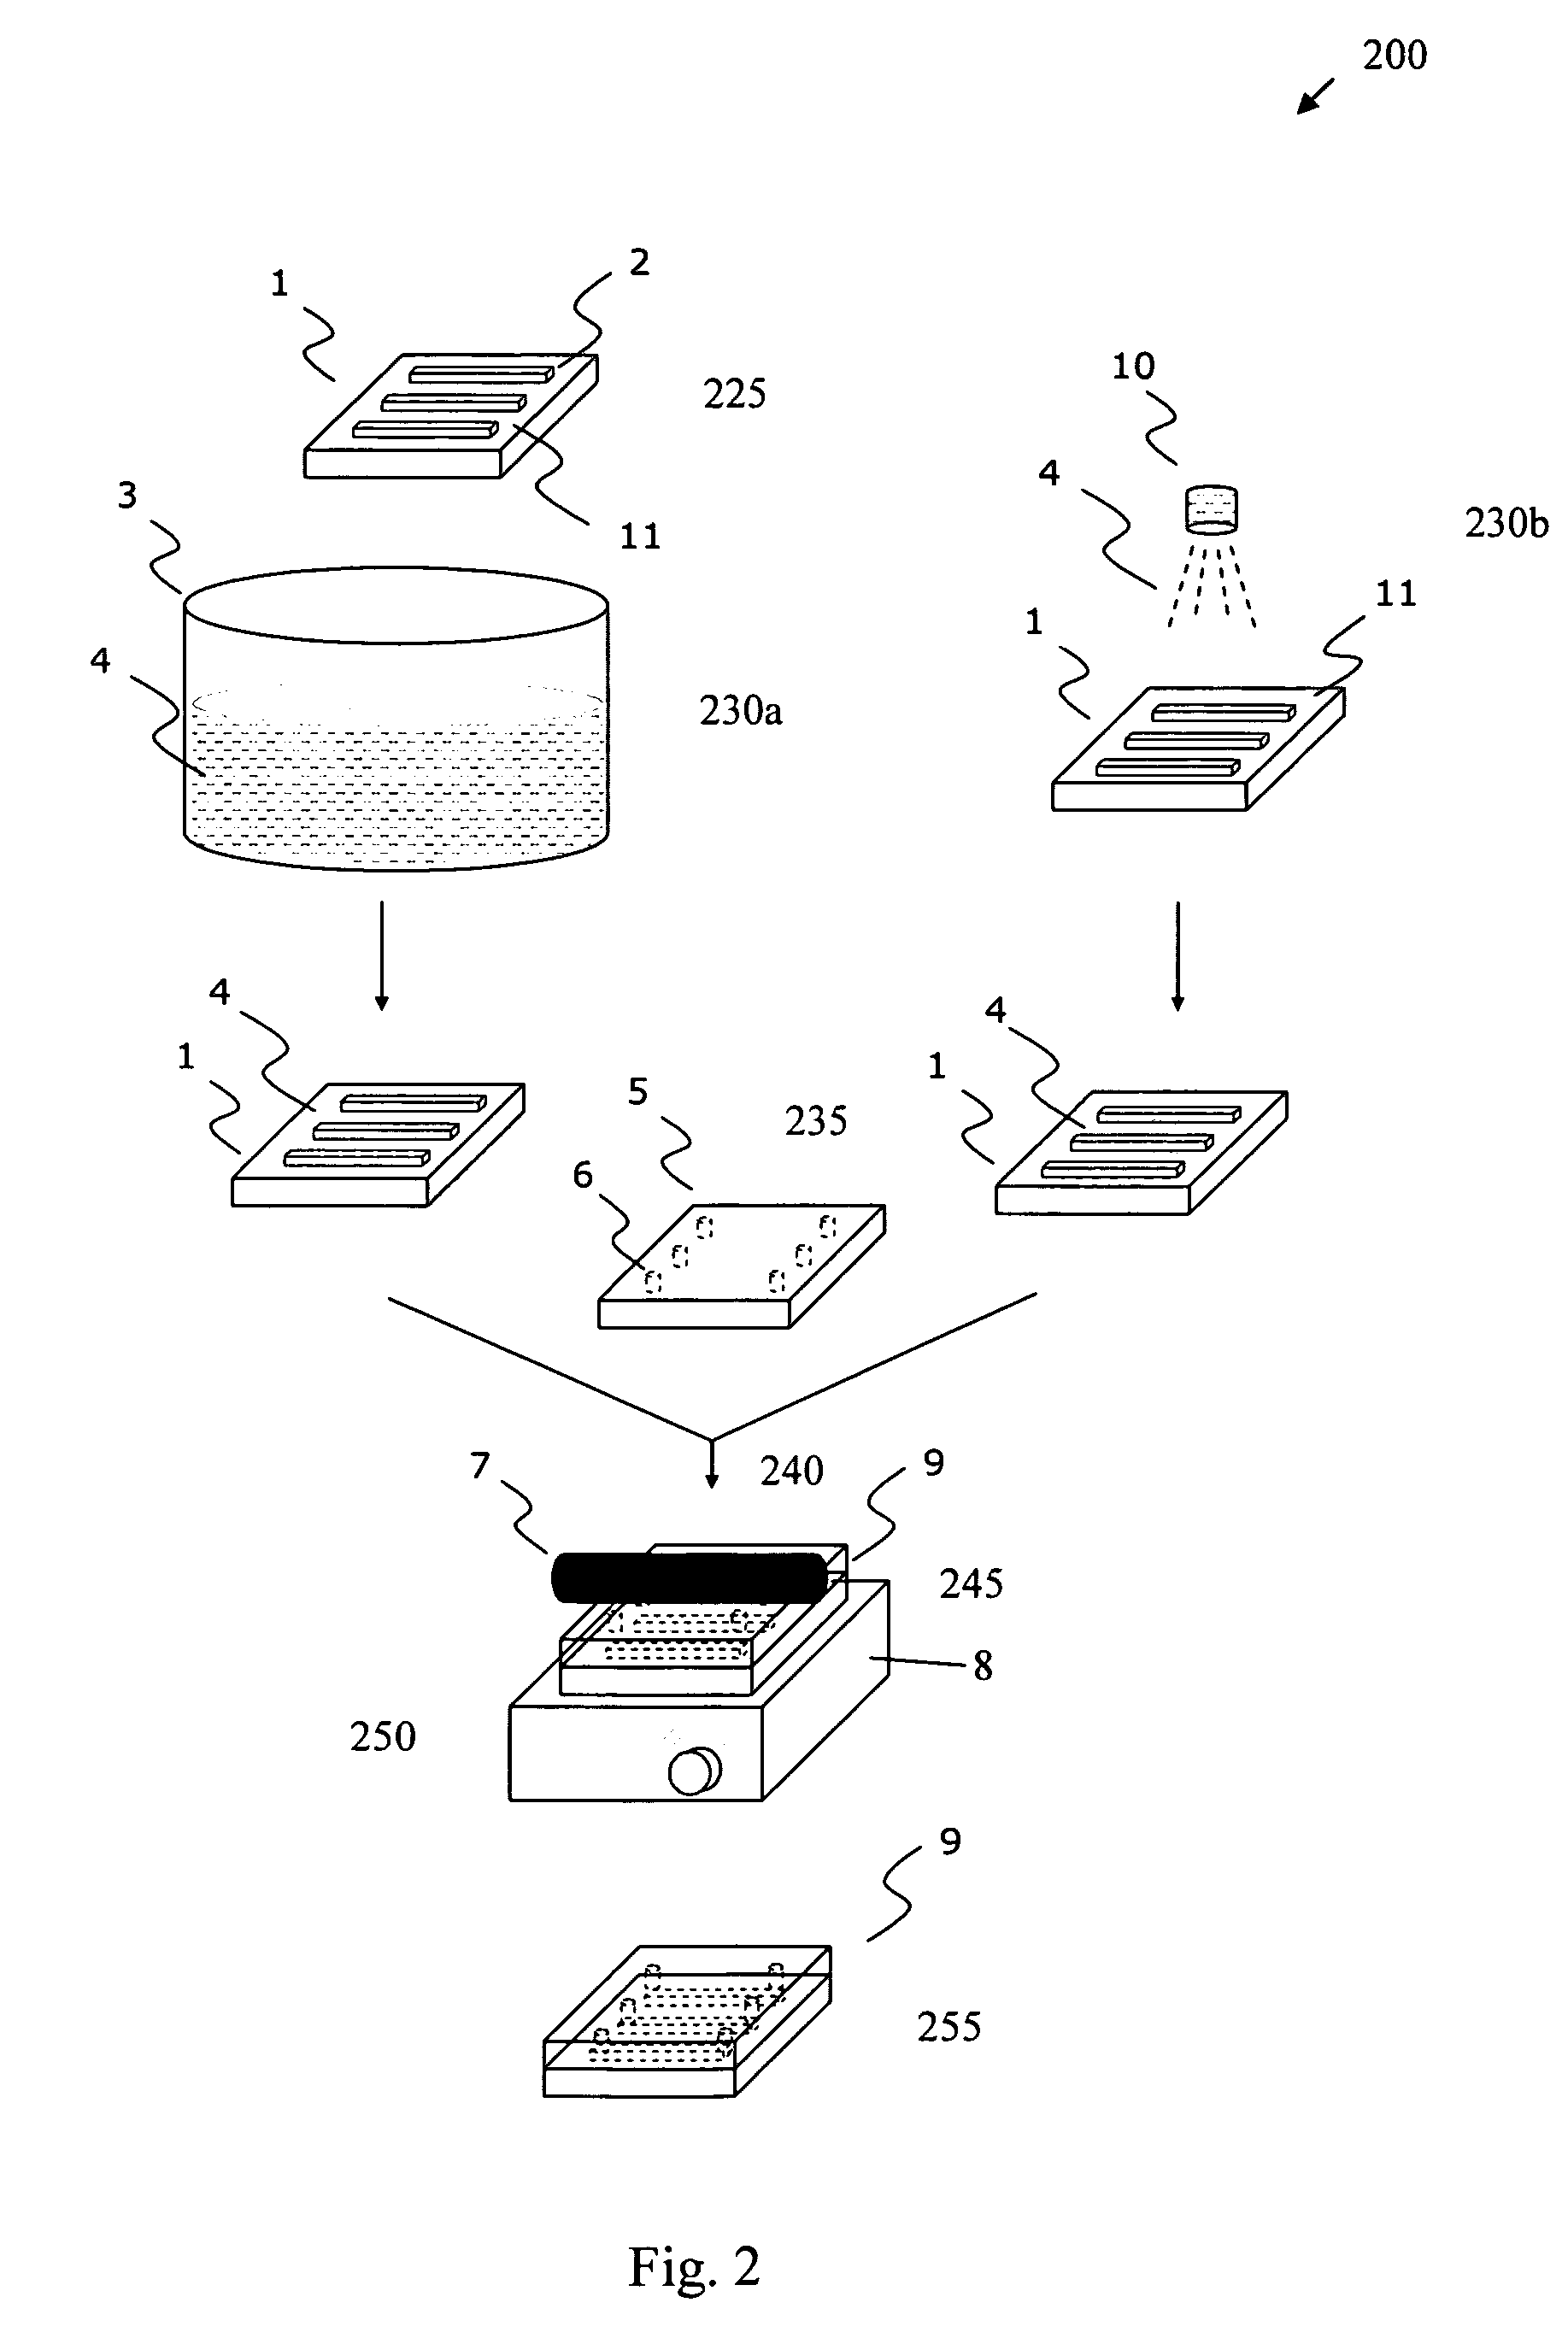 Laminated microfluidic structures and method for making